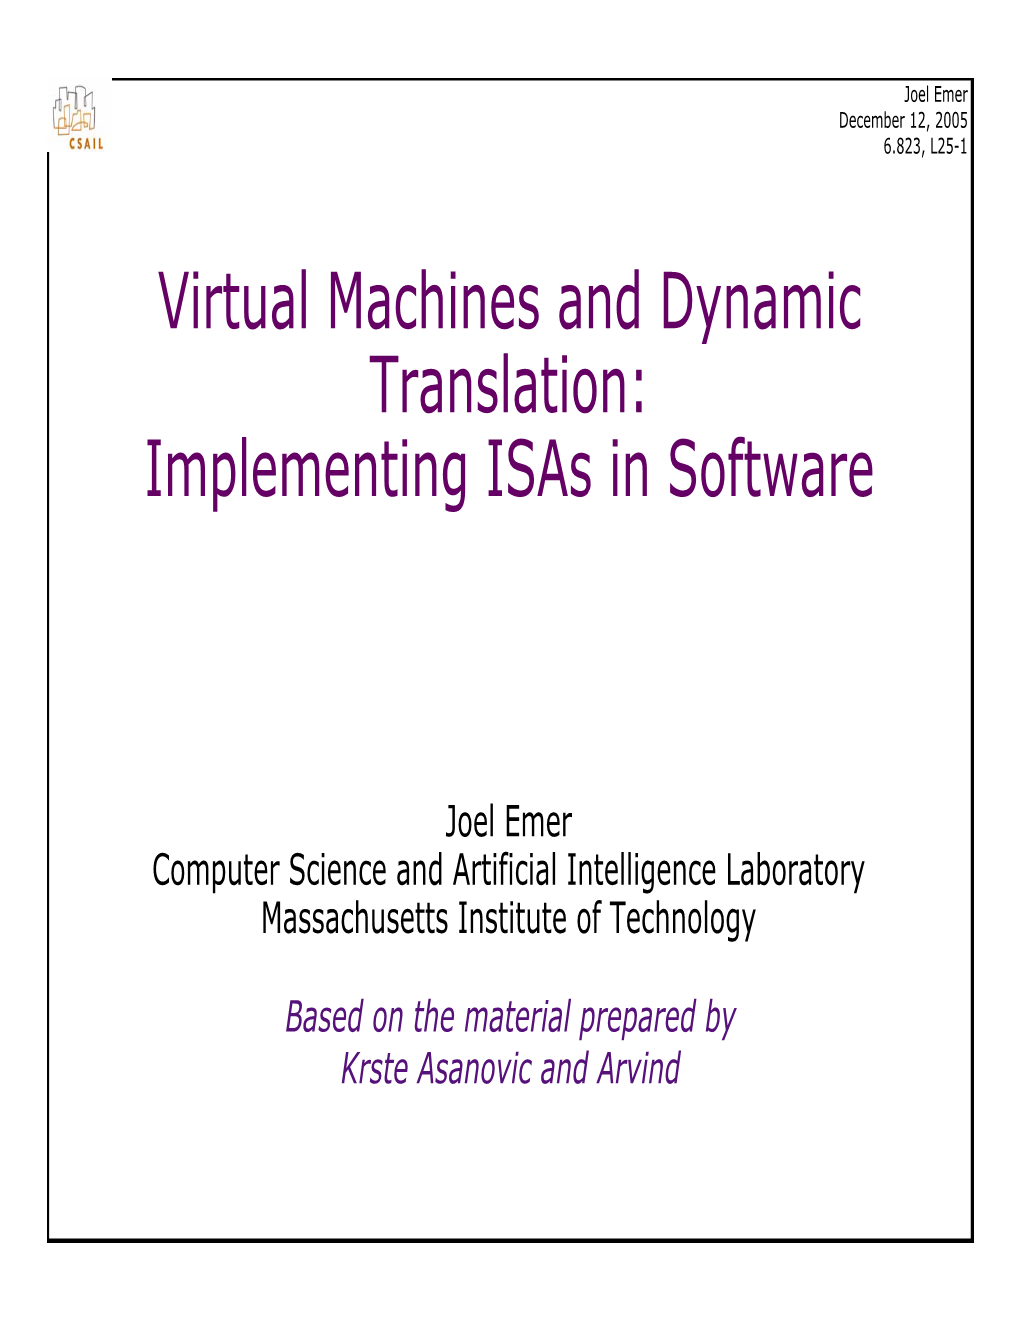 Virtual Machines and Dynamic Translation: Implementing Isas in Software